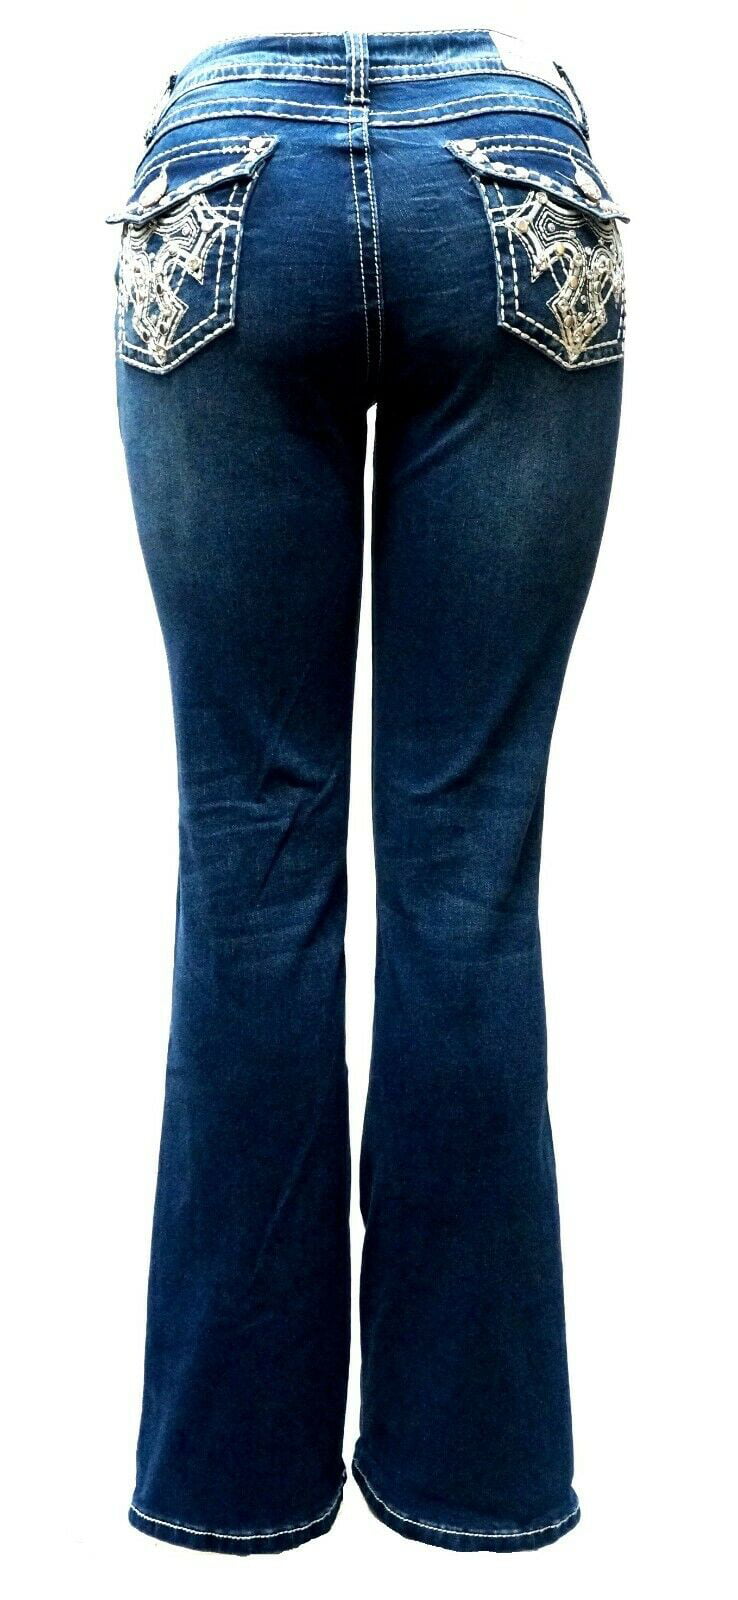 Old Navy, Jeans, Bnwt Light Wash Bootcut Jeans High Rise Size 8